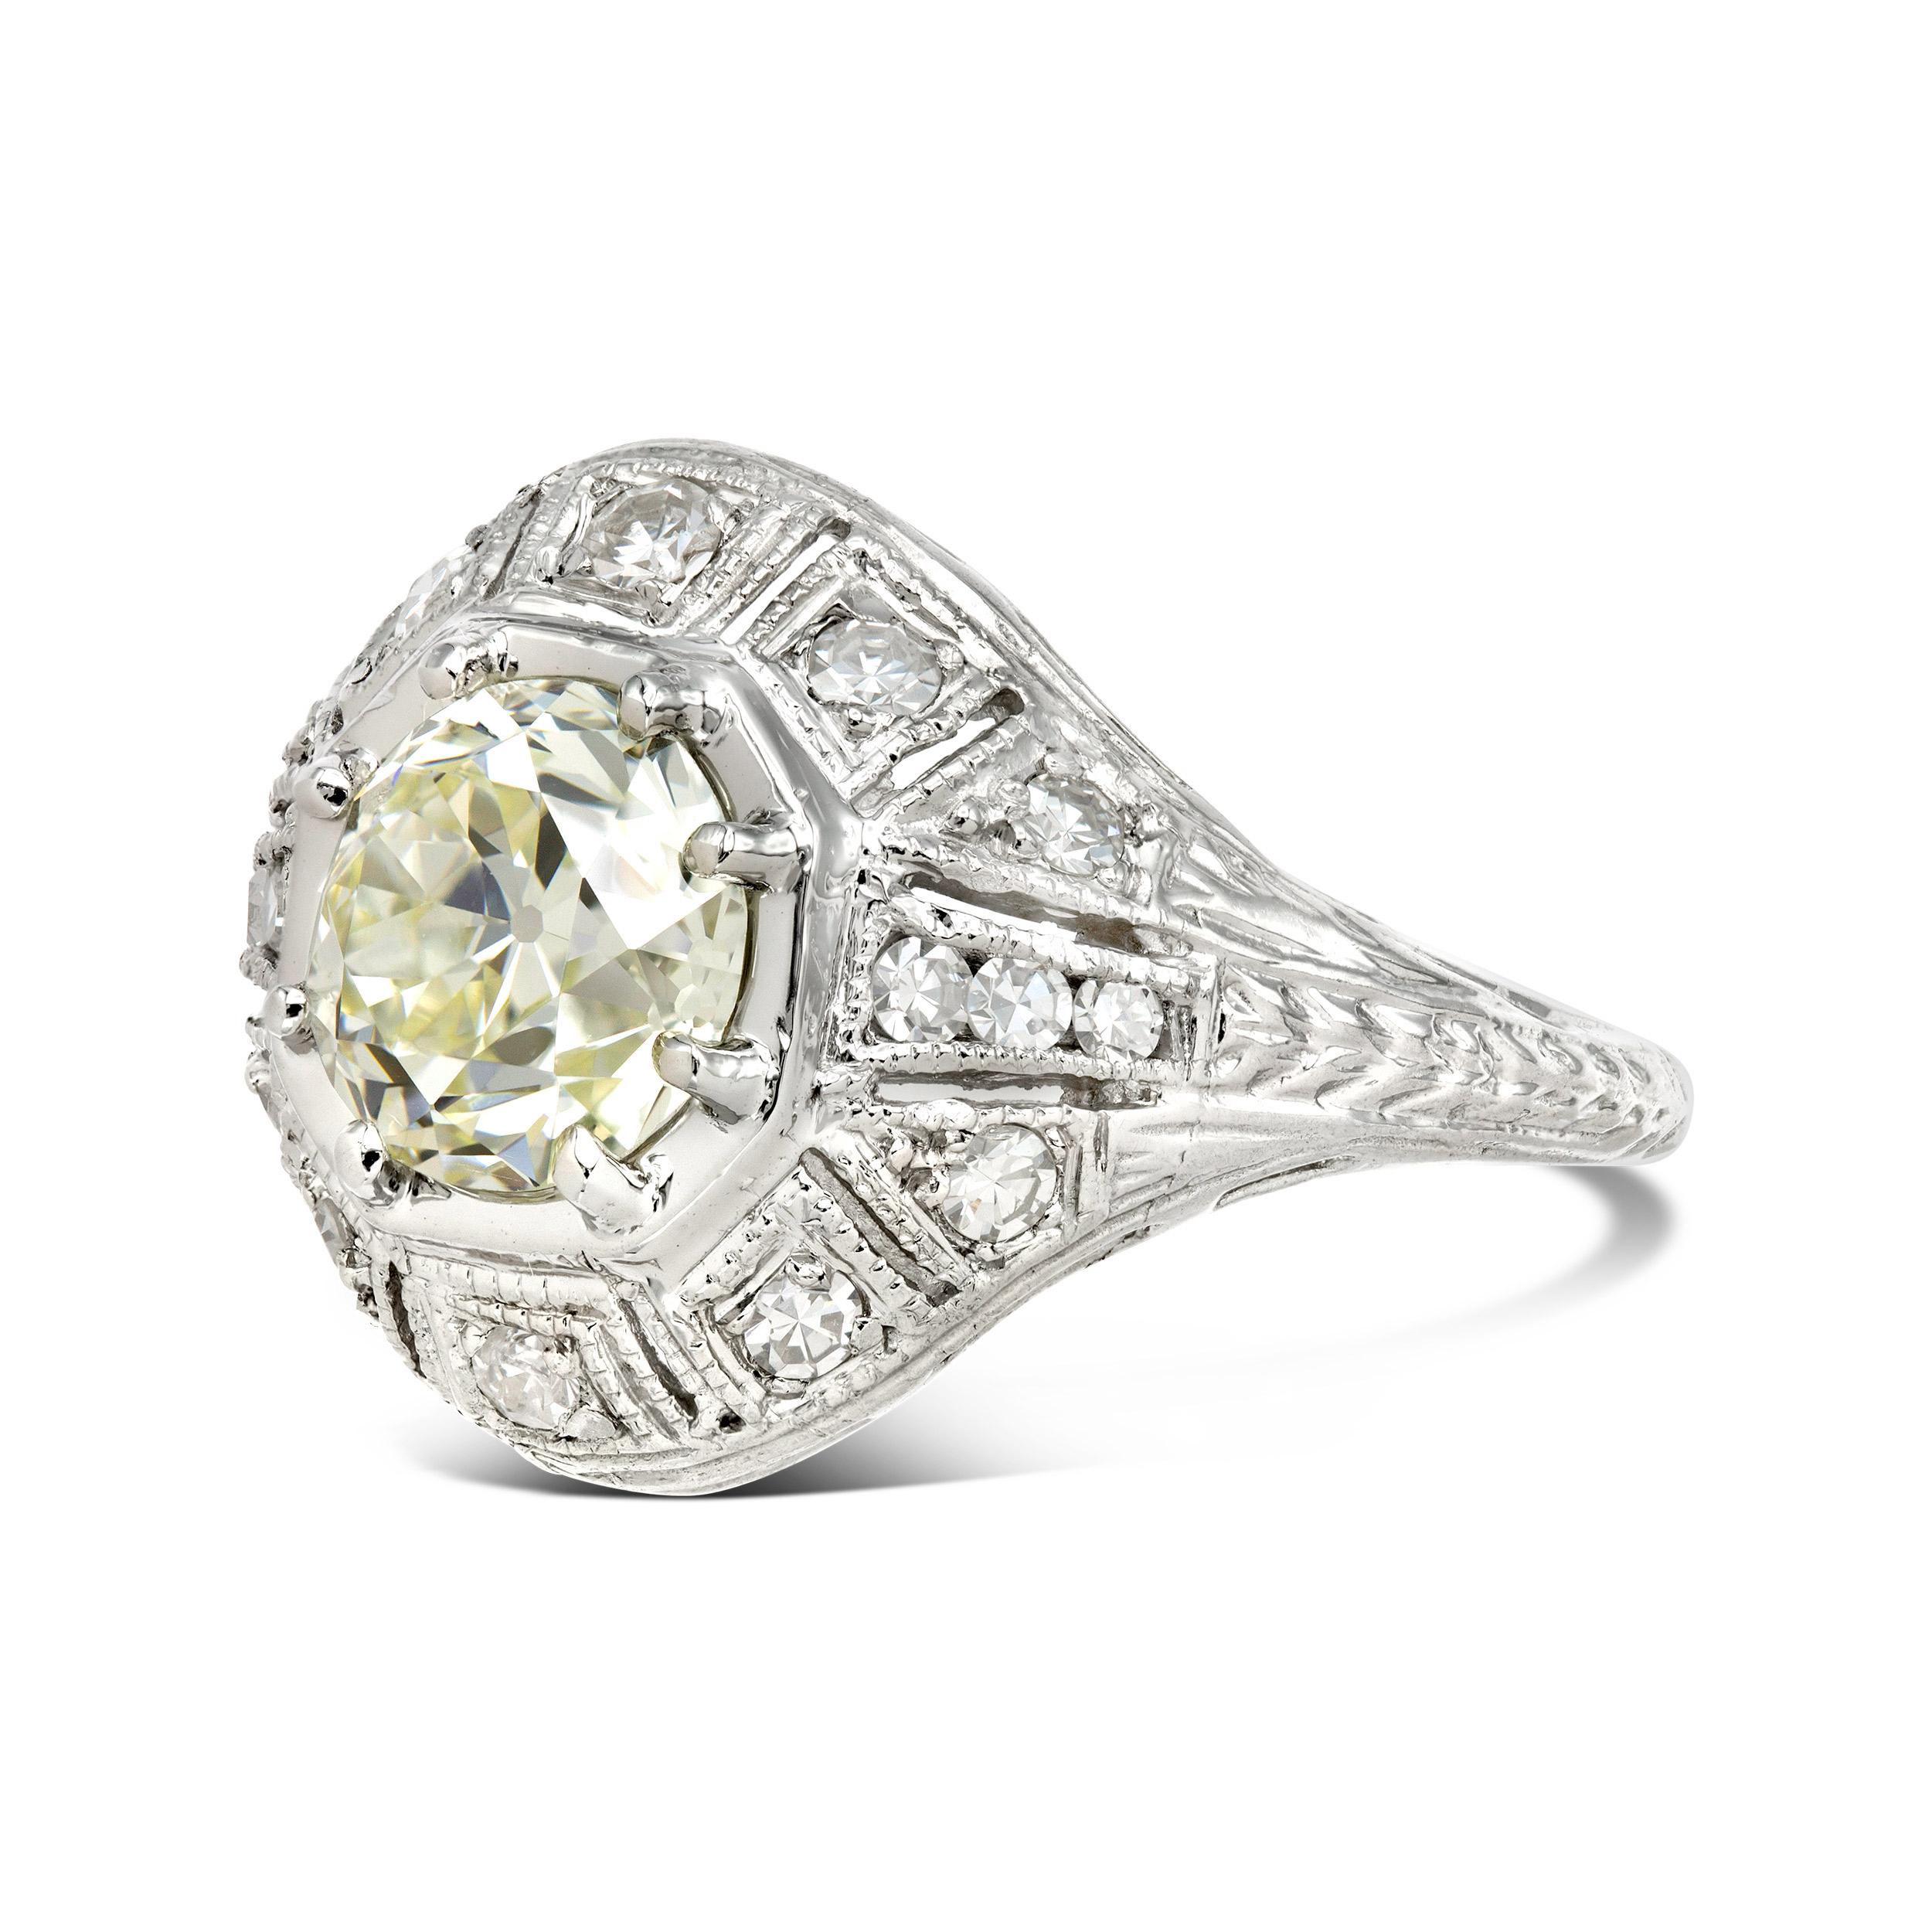 Diamond Details

Primary Stone: 1.51 ct. Old European  
Color/Clarity: M / VS1, GIA Certified
Accent Stones: (16) single cut diamonds
Accent Stone Weight: 0.30 ct. 
Accent Color/Clarity:  H-I / VS
Ring Specifications

Total Diamond Weight: 1.81